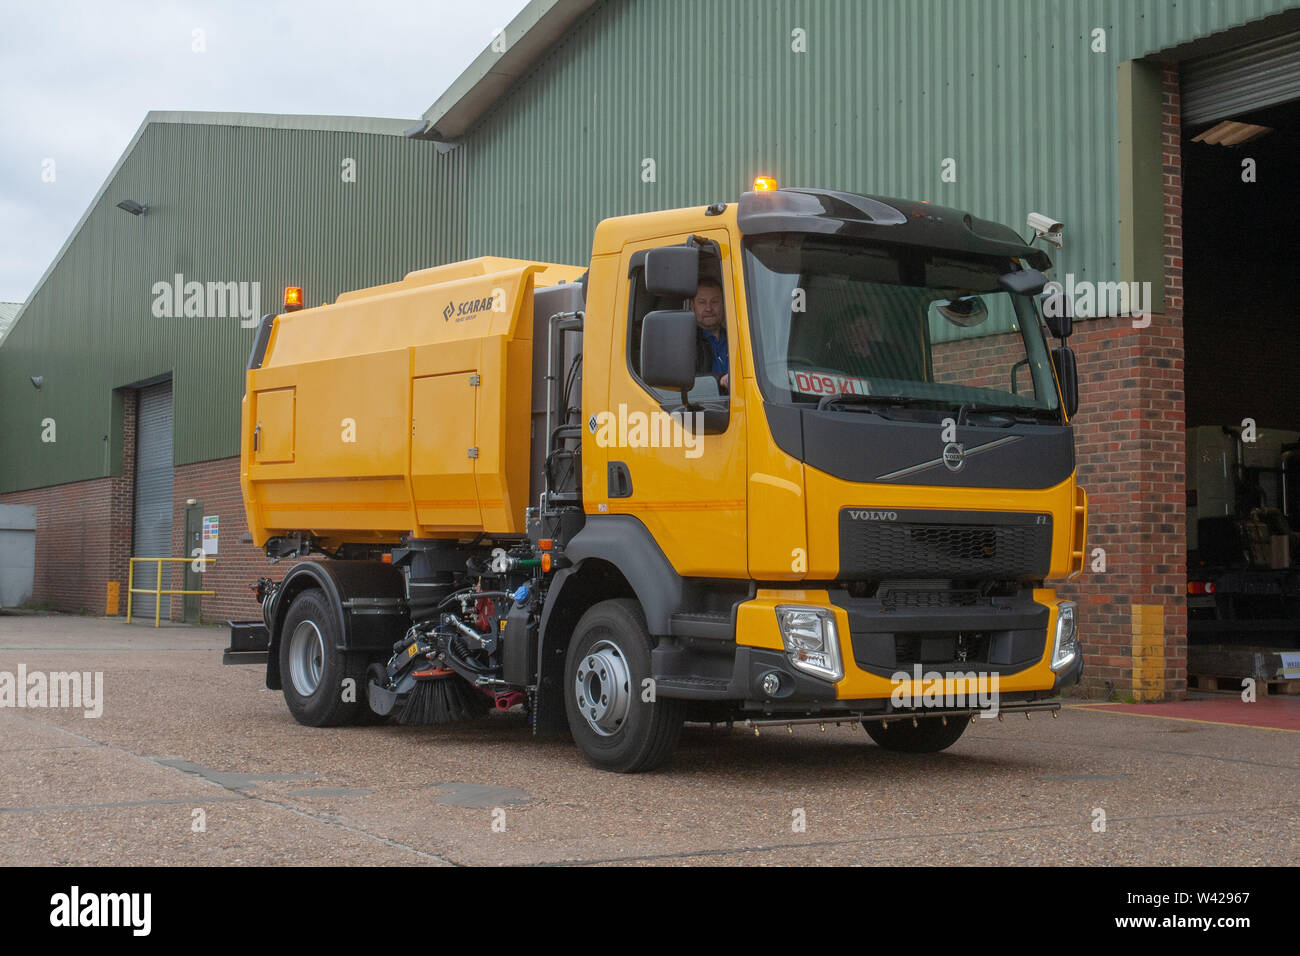 A Scarab Road Sweeper ready for delivery to client UK Stock Photo